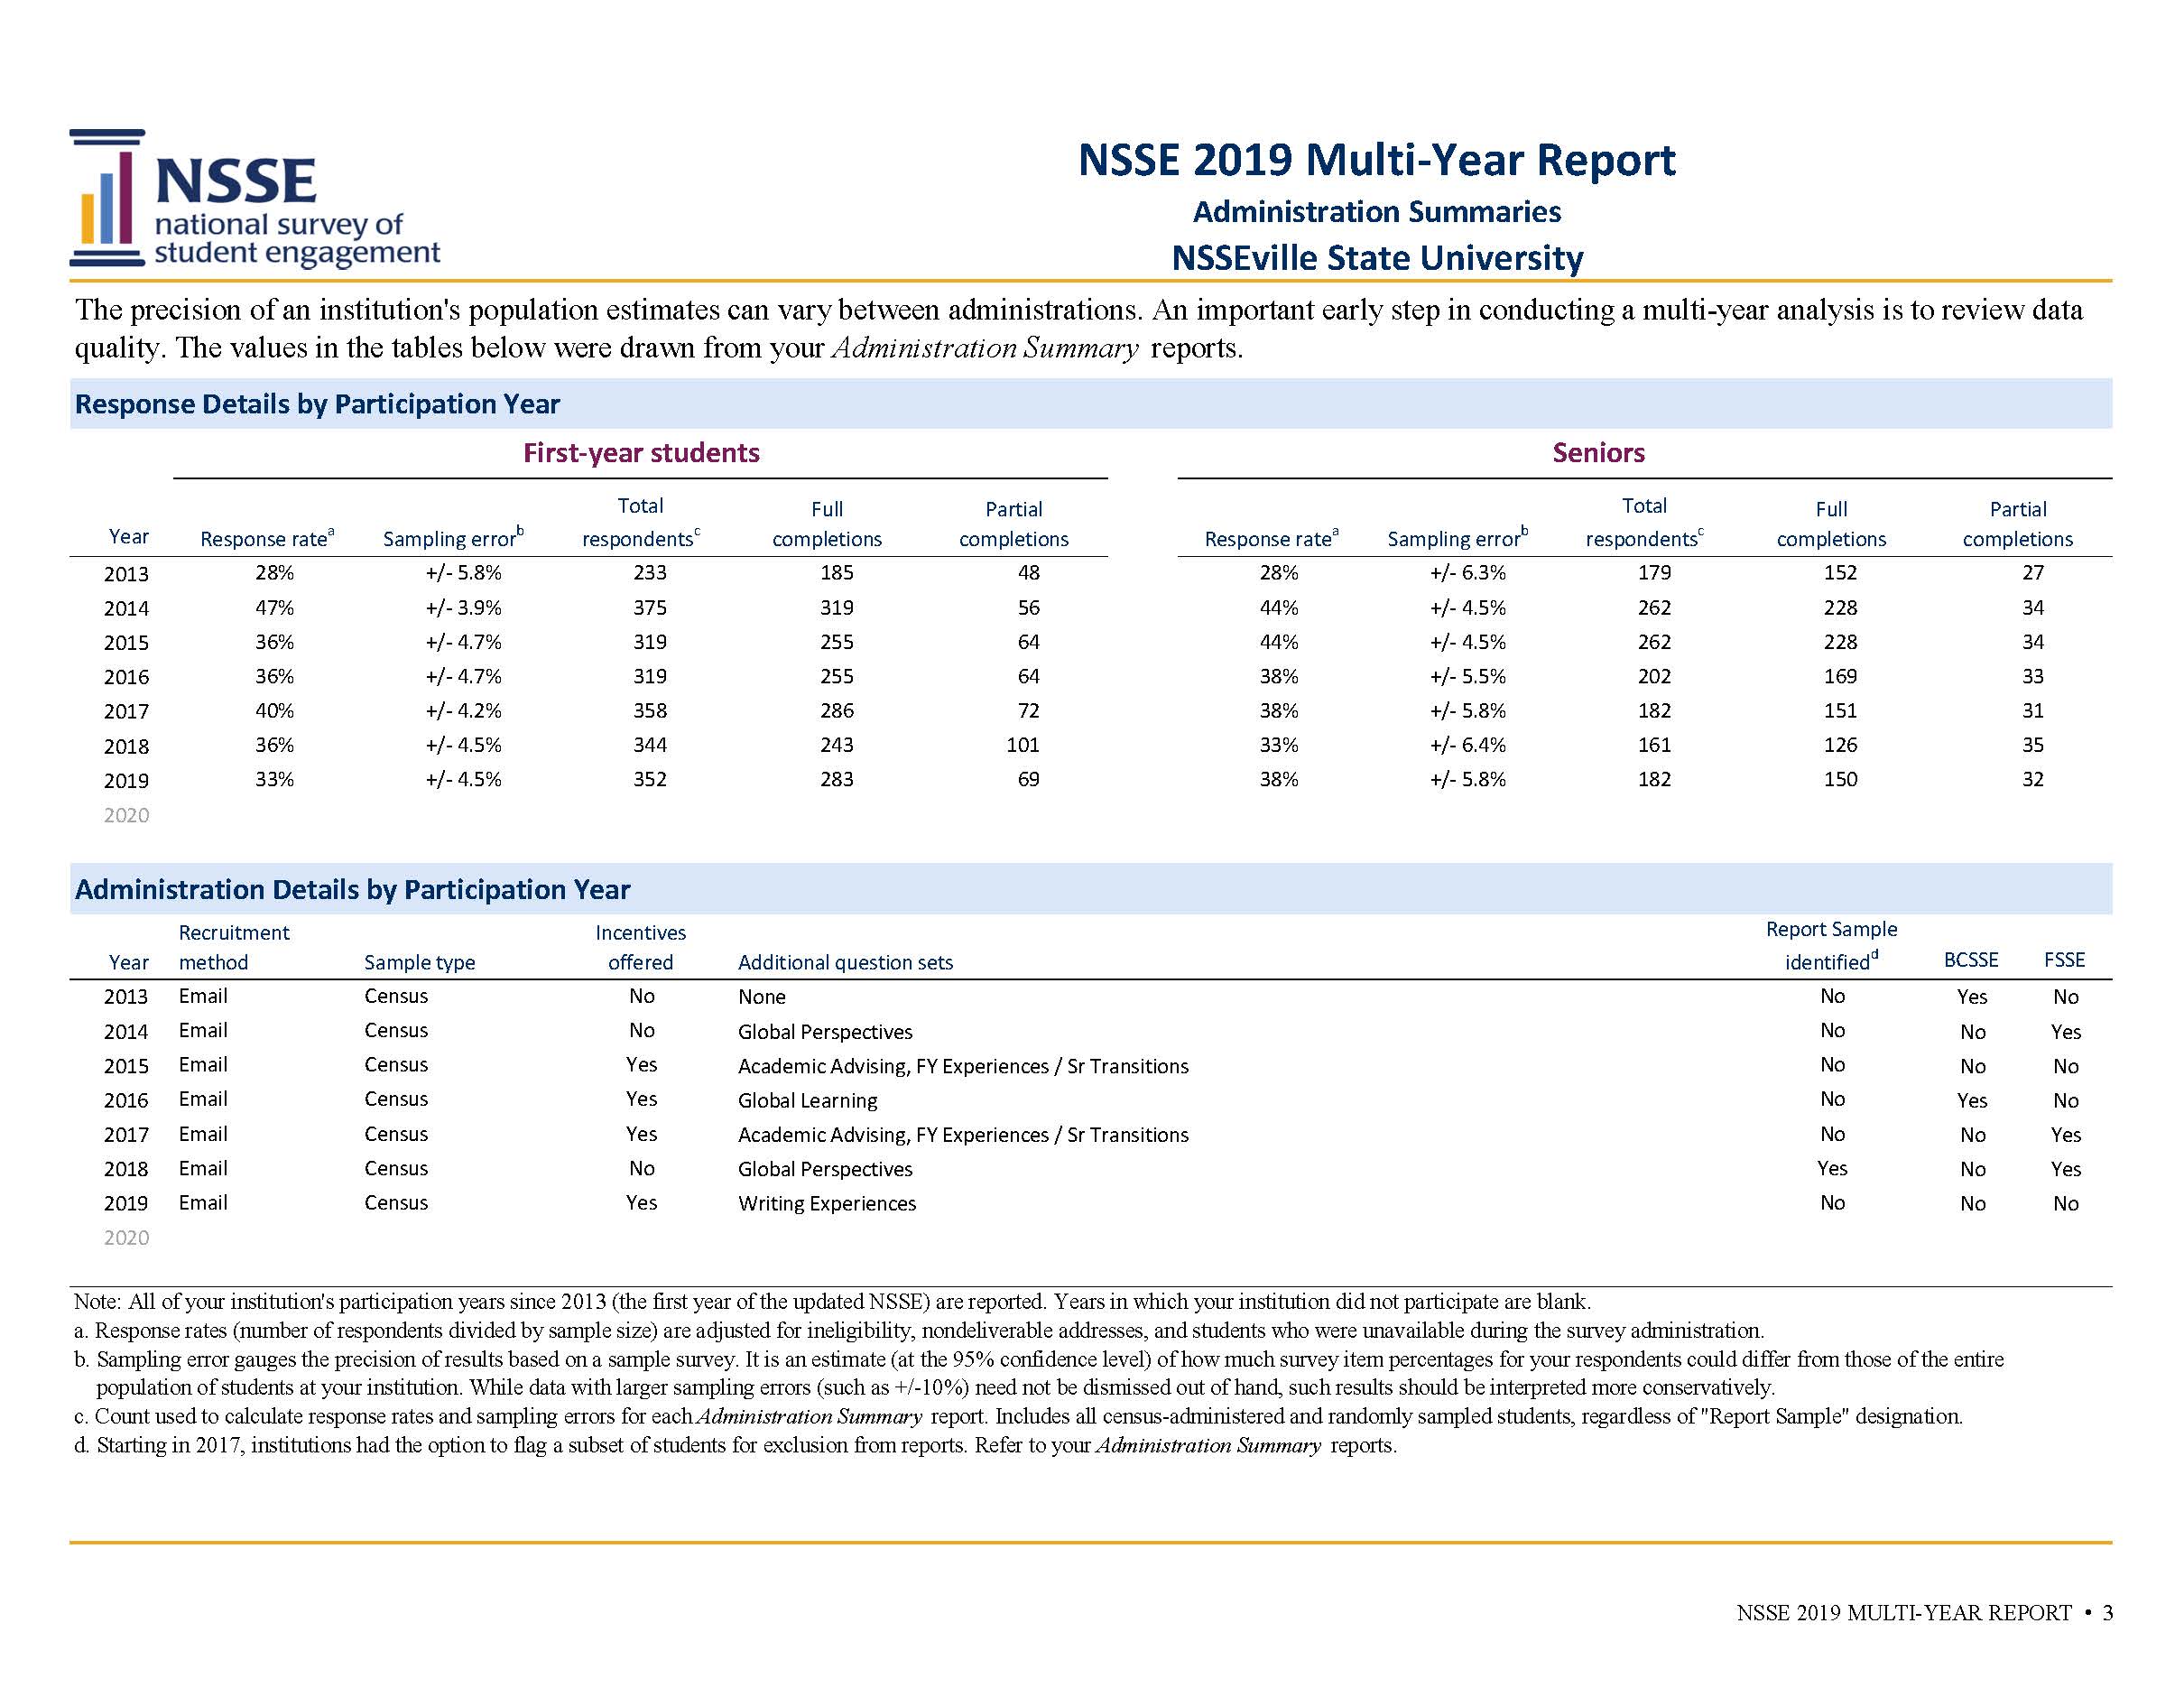 Sample Report: page 3 of NSSE Multi-Year Report